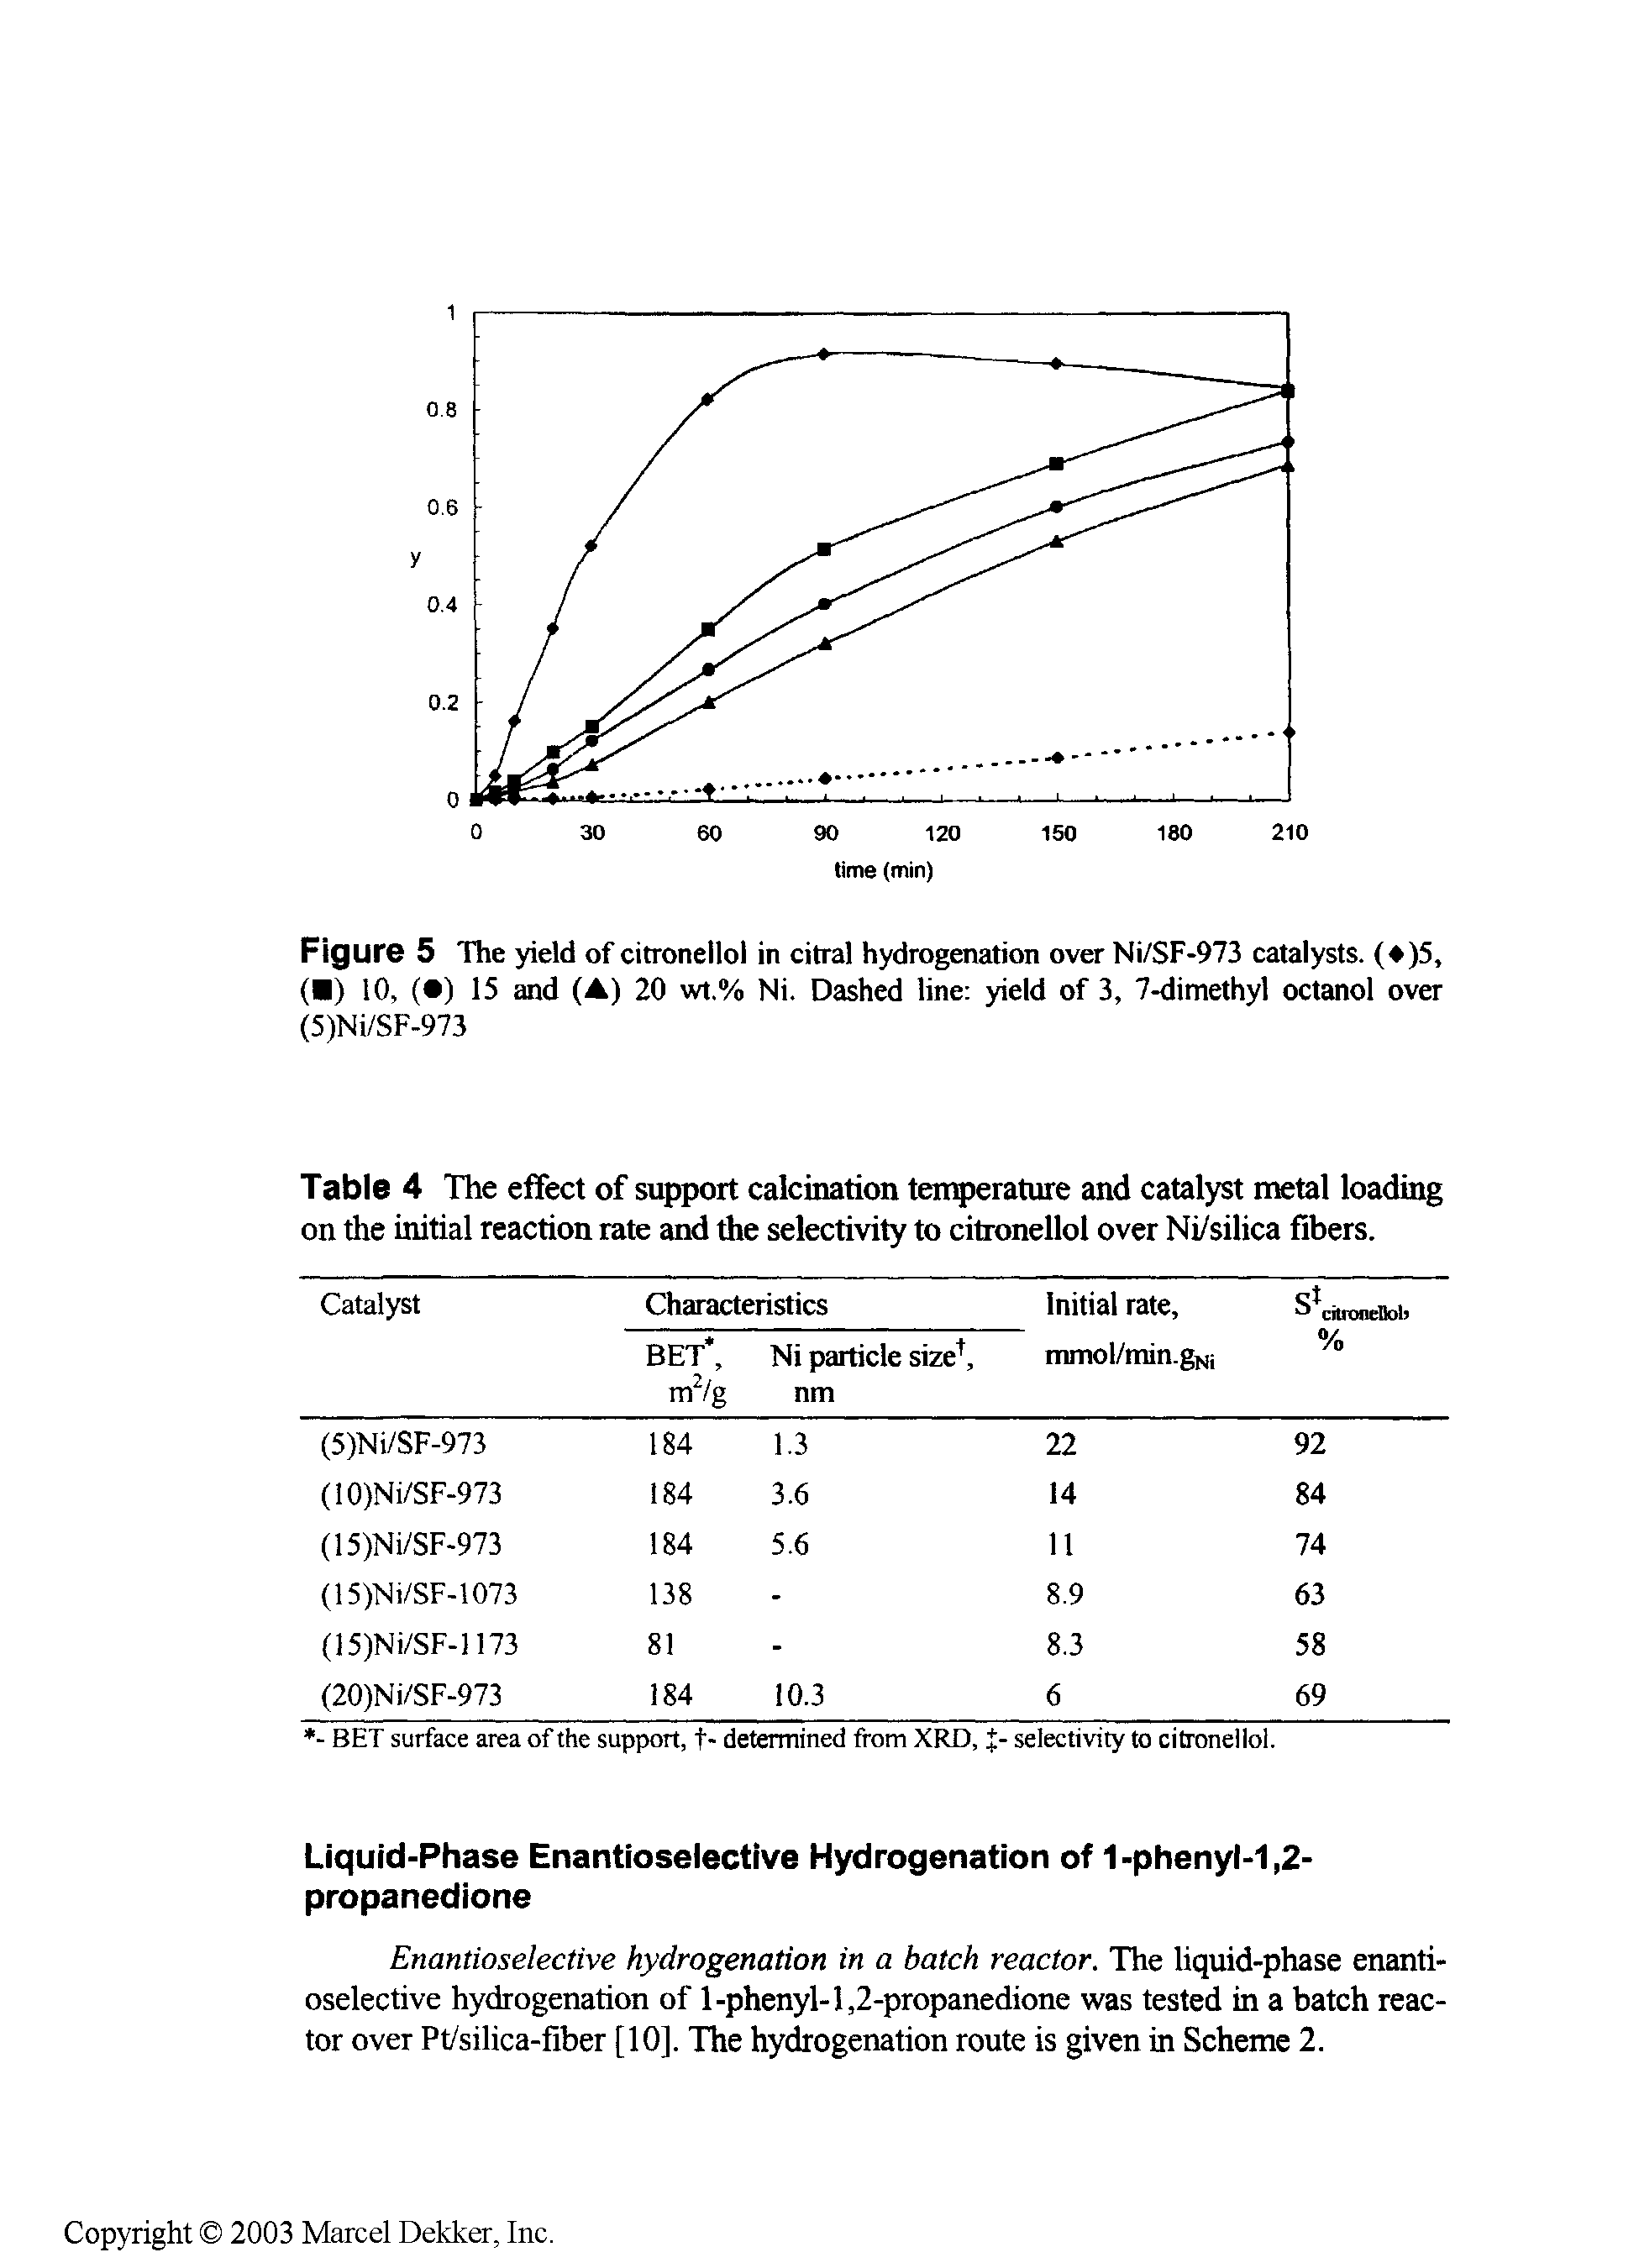 Table 4 The effect of support calcination temperature and catalyst metal loading on the initial reaction rate and the selectivity to citronellol over Ni/silica fibers.